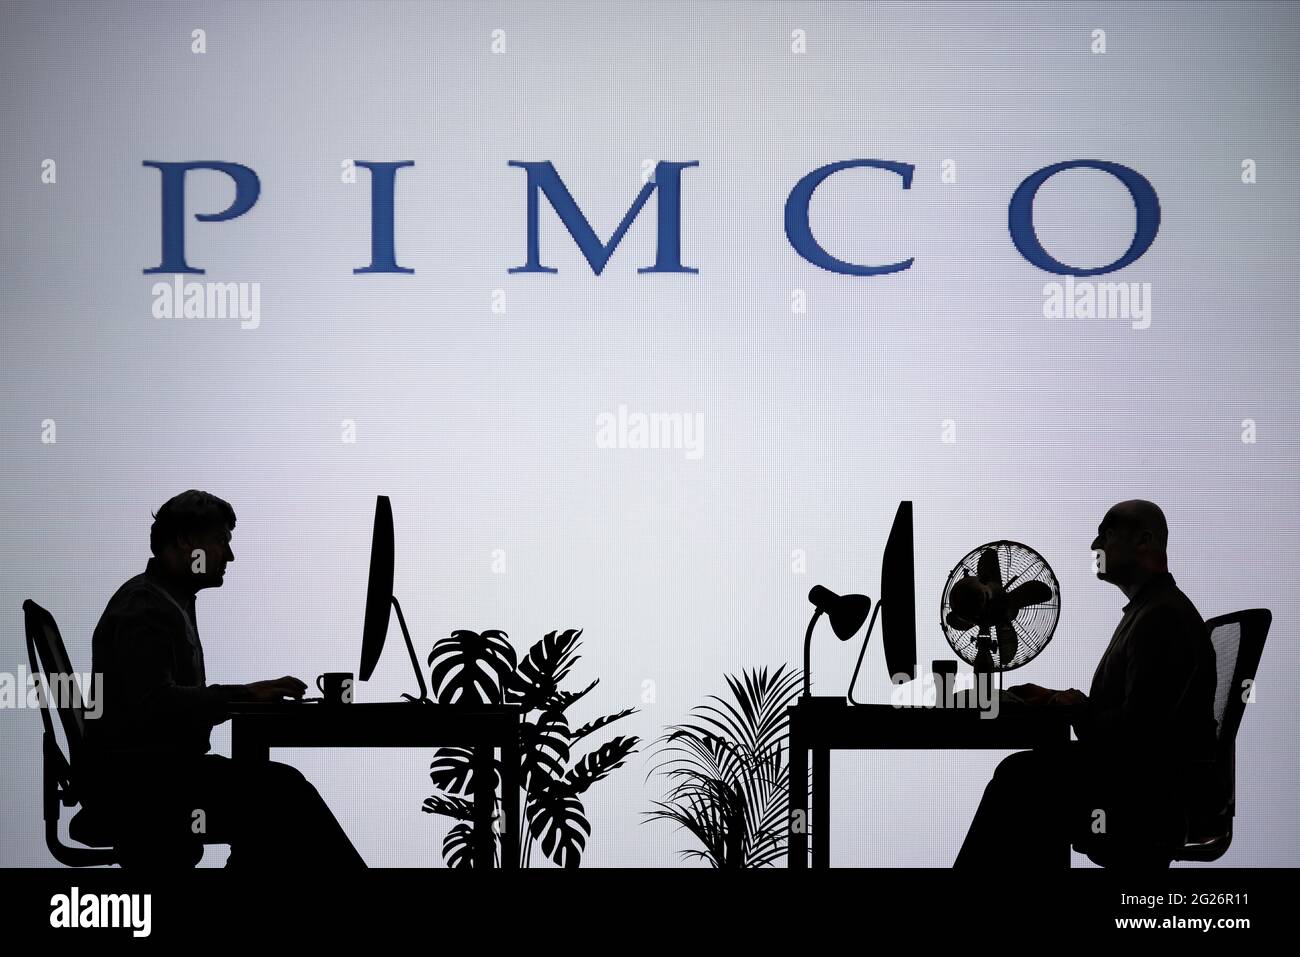 The Pimco logo is seen on an LED screen in the background while two silhouetted people work in an office environment (Editorial use only) Stock Photo